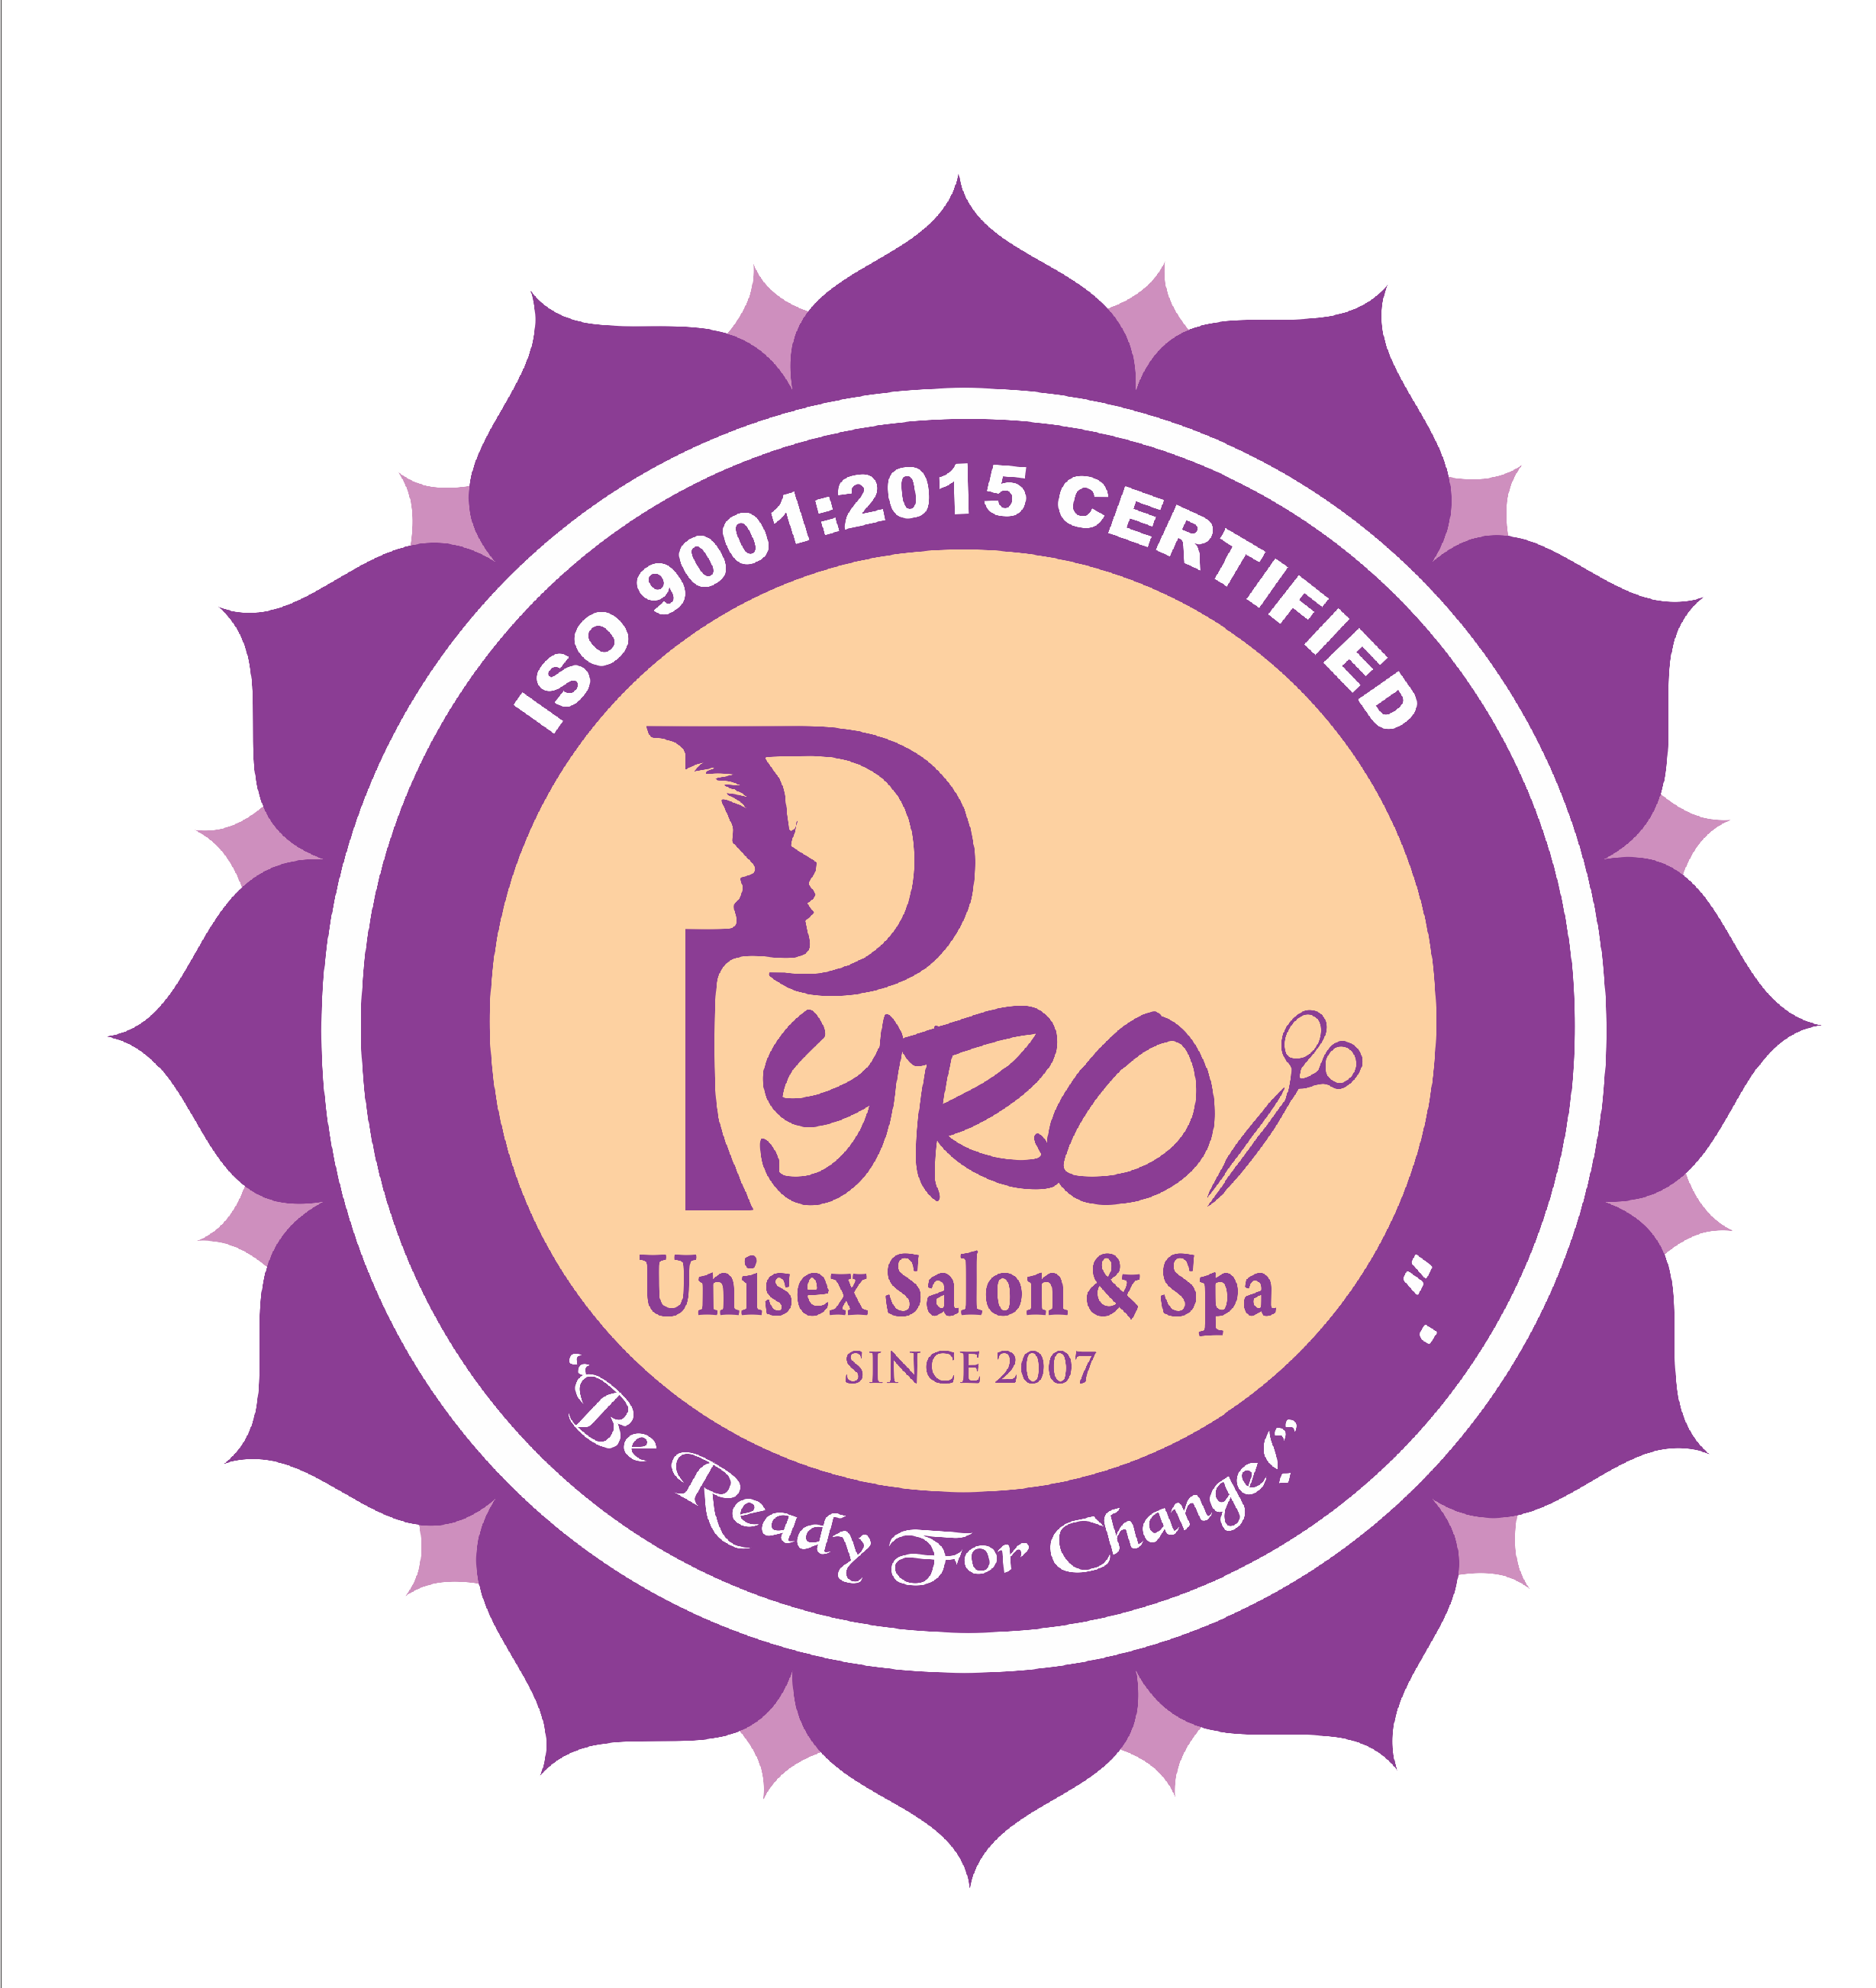 Pyro Unisex Salon And Spa|Gym and Fitness Centre|Active Life